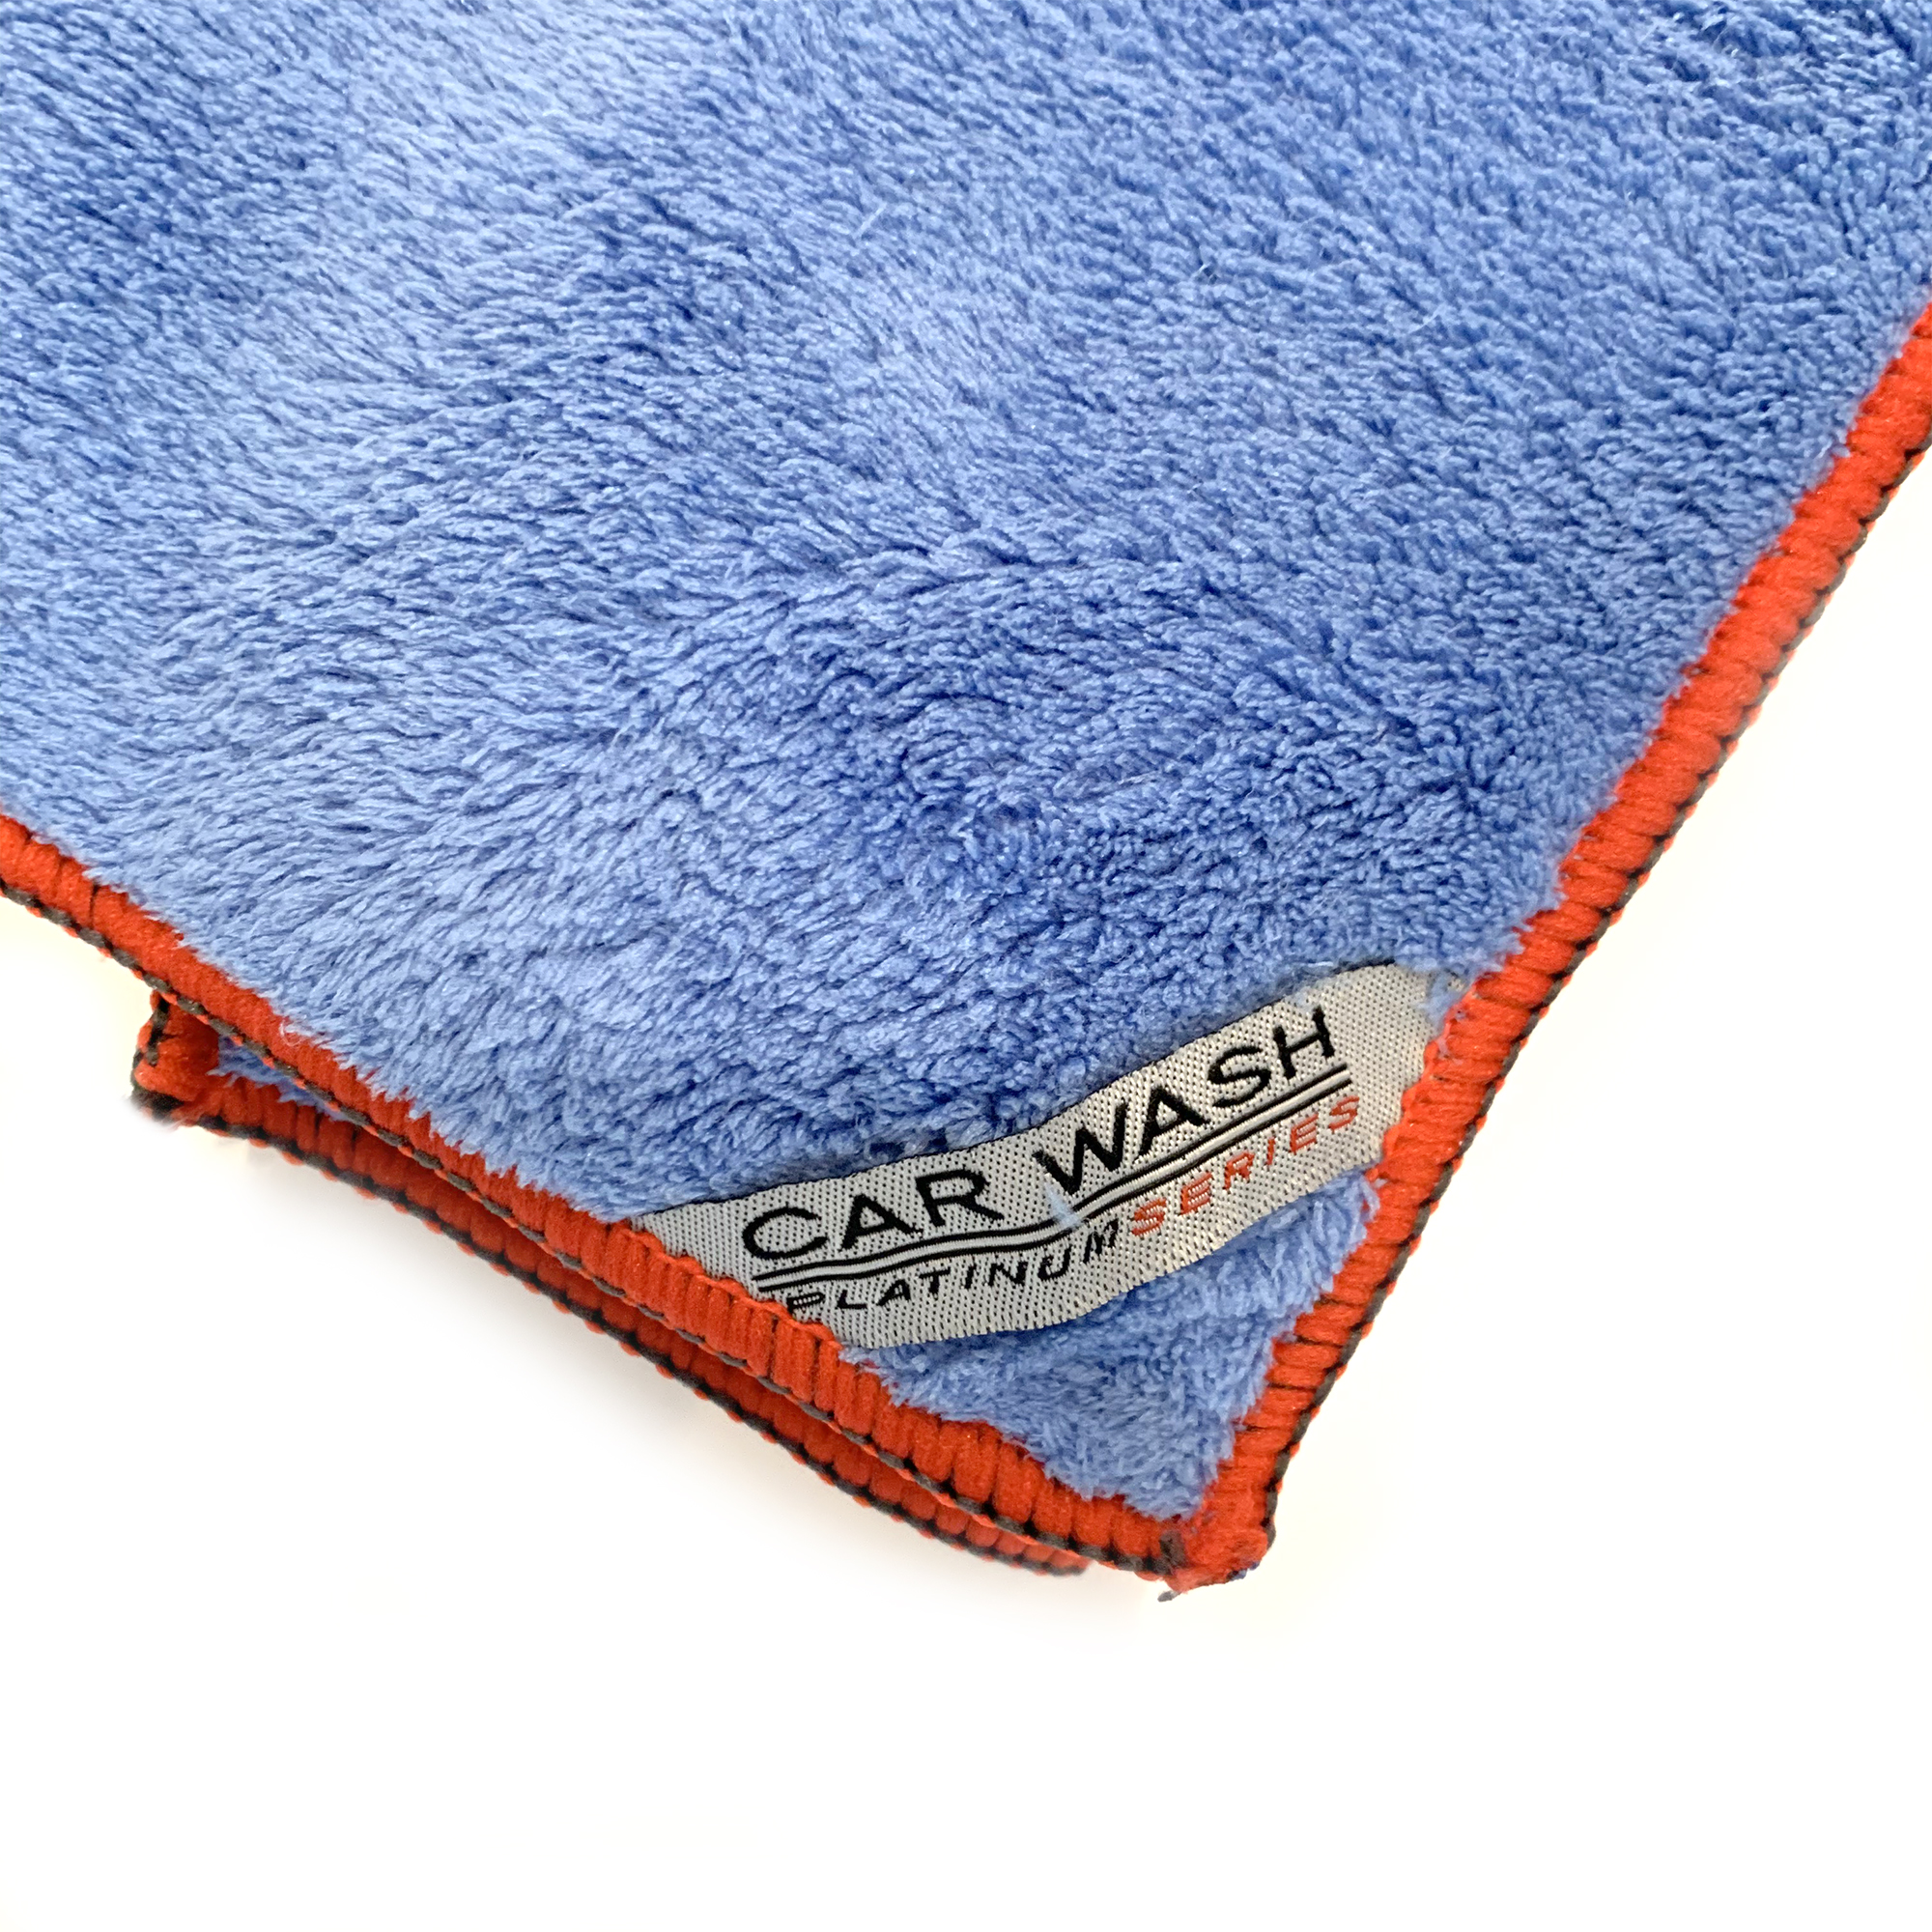 Cheap 40*100cm Coral Fleece Car Wash Towel Super Absorbent Soft Car Cleaning  Wash Towel Wiping Cloth Cars Care